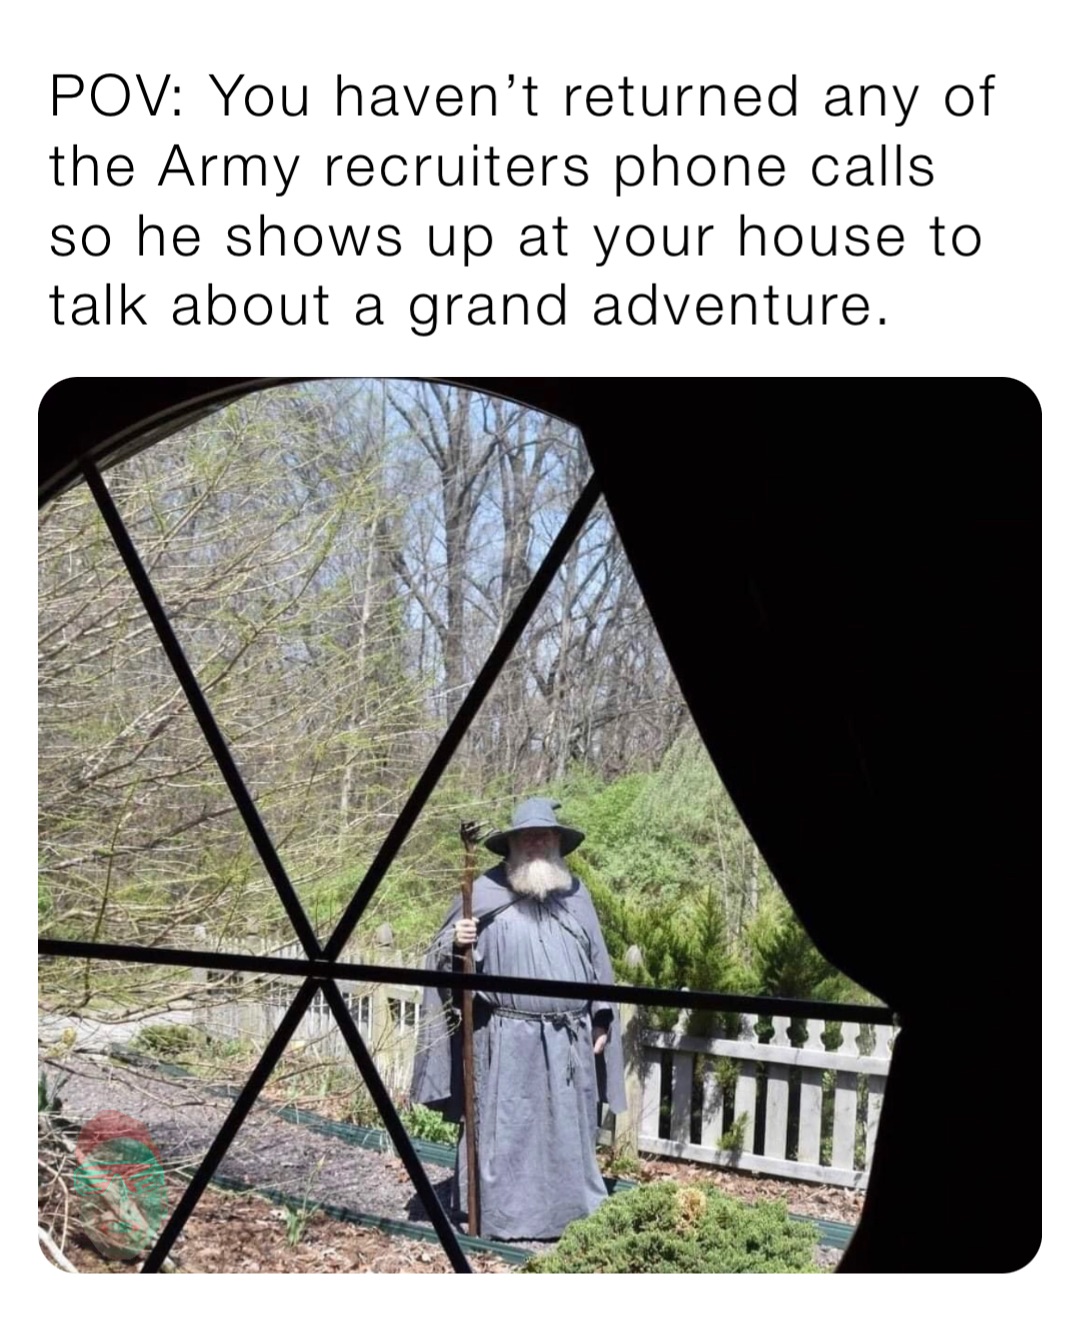 POV: You haven’t returned any of the Army recruiters phone calls so he shows up at your house to talk about a grand adventure.